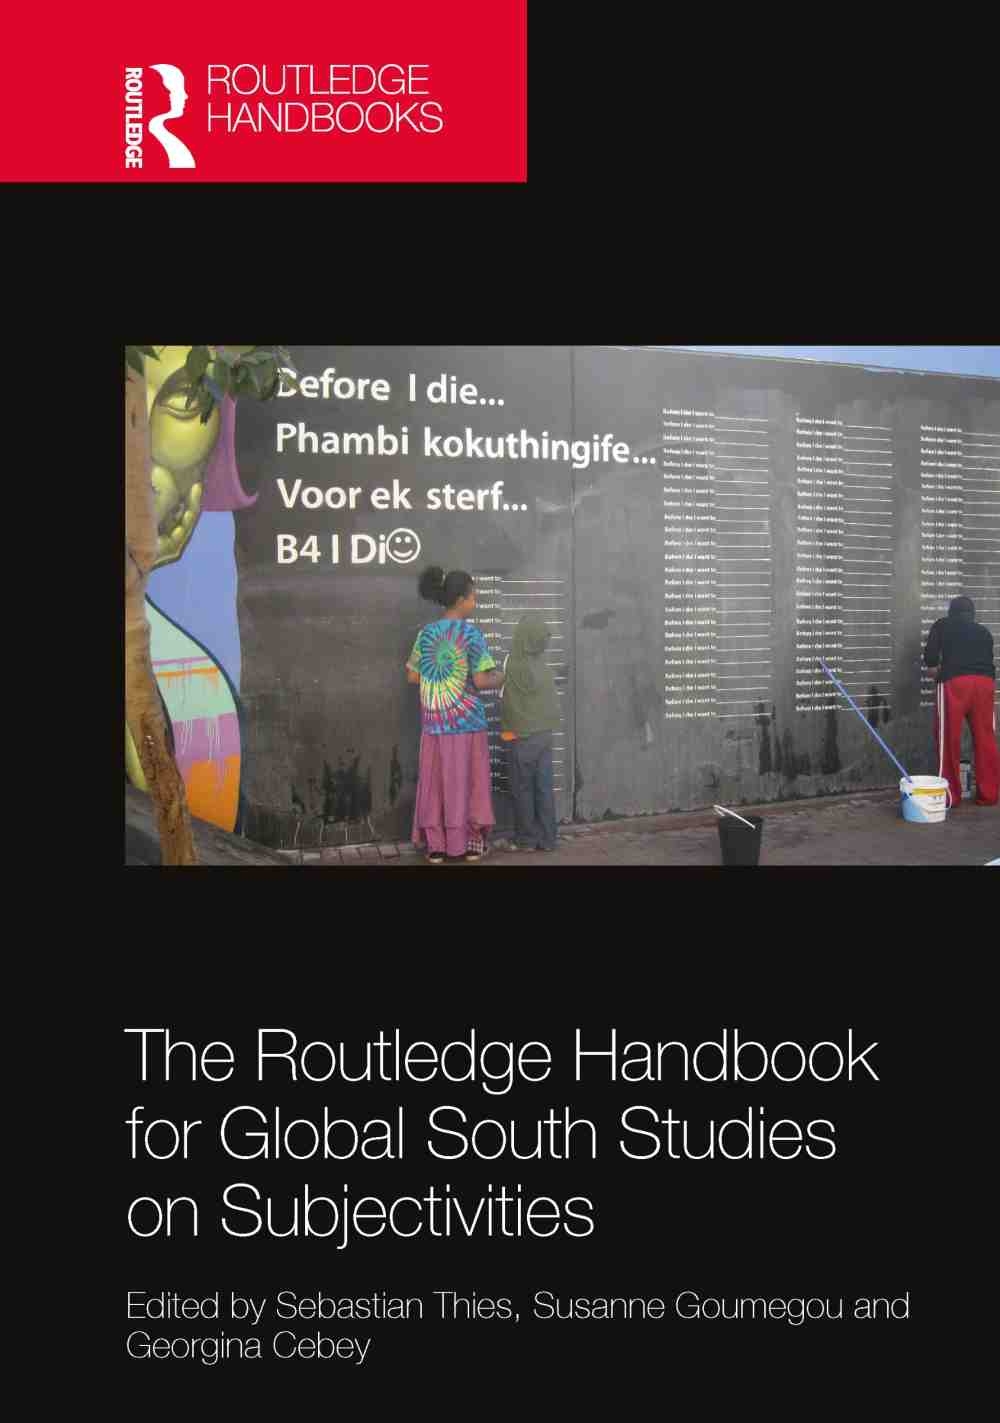 The Routledge Handbook of Contested Subjectivities in the Global South